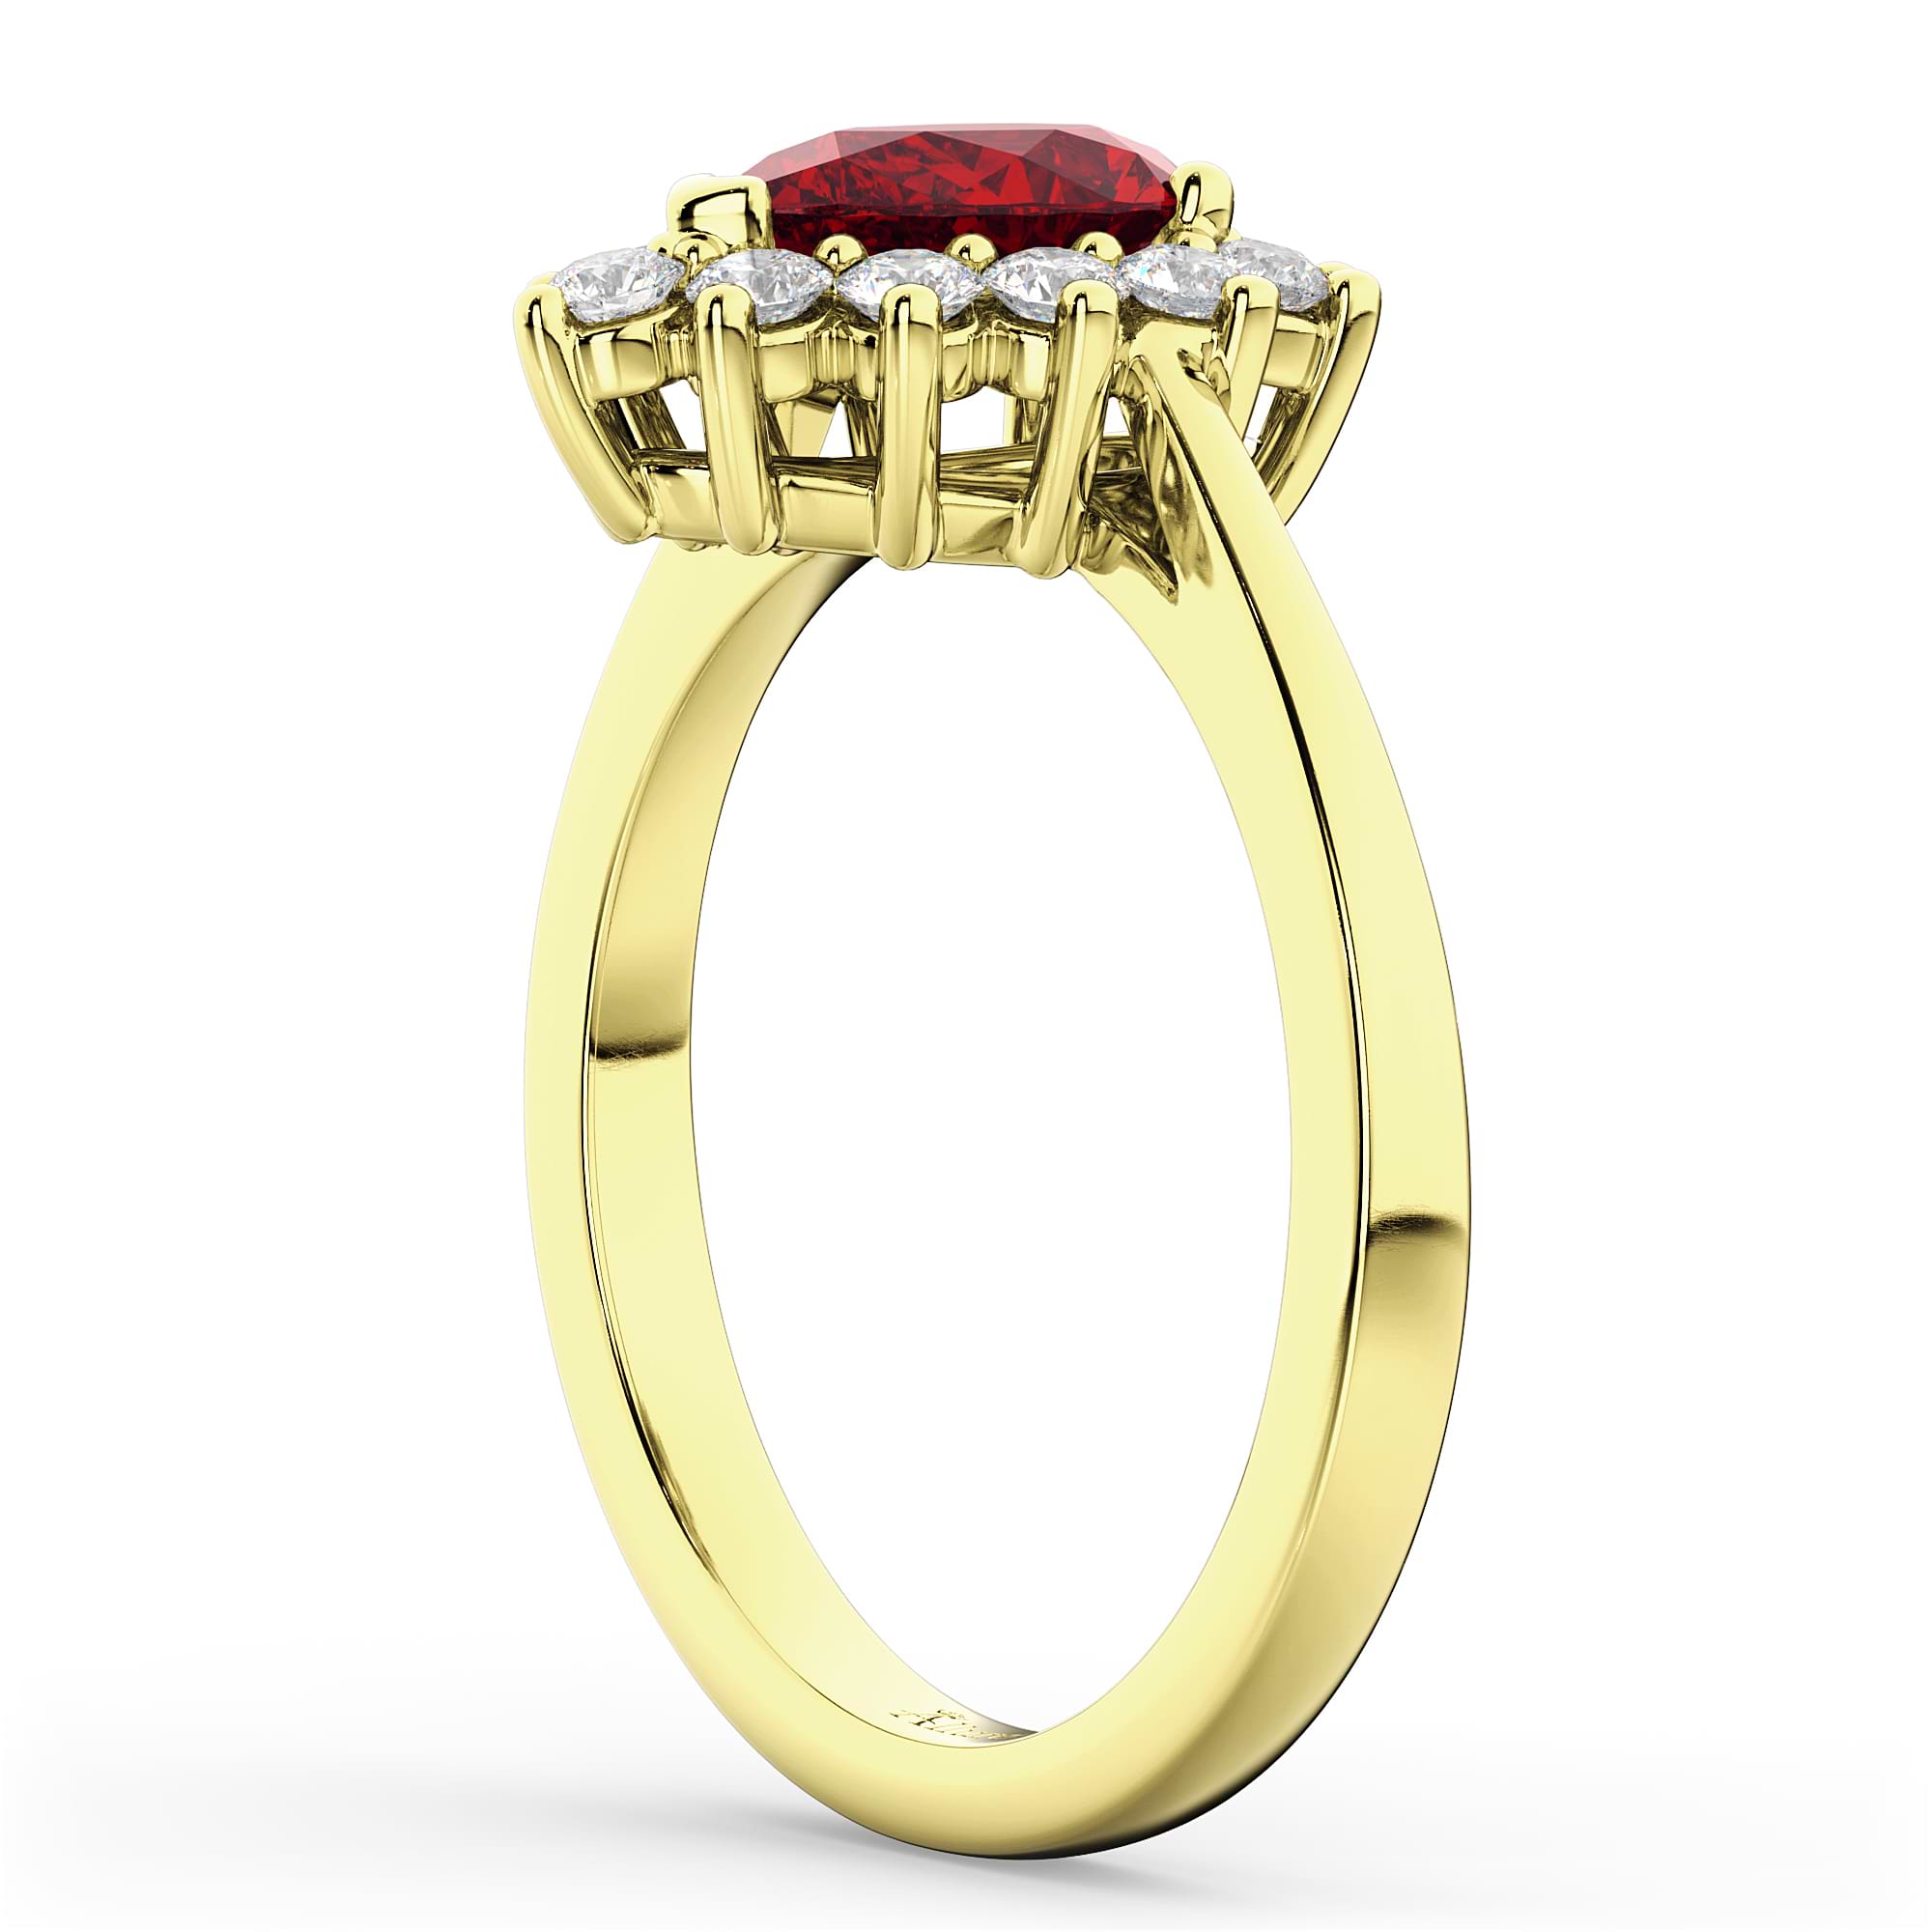 Halo Ruby & Diamond Floral Pear Shaped Fashion Ring 14k Yellow Gold (1.27ct)